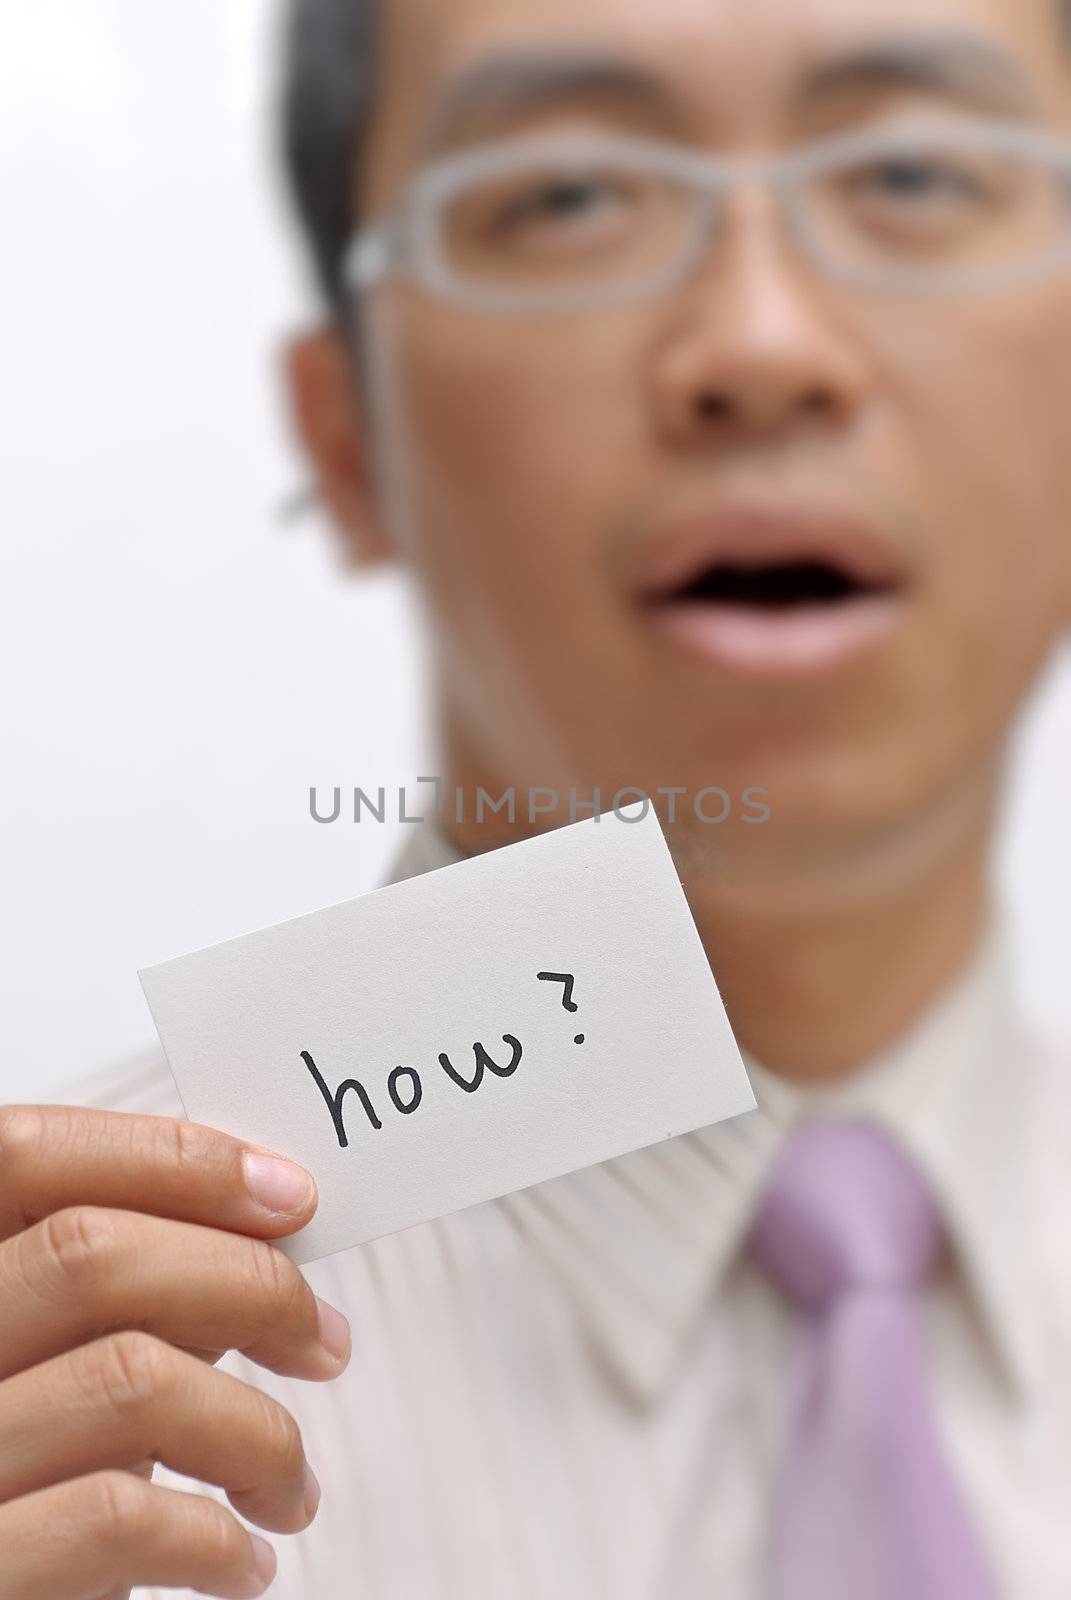 Manager ask you ��how�� and holding one card with words.